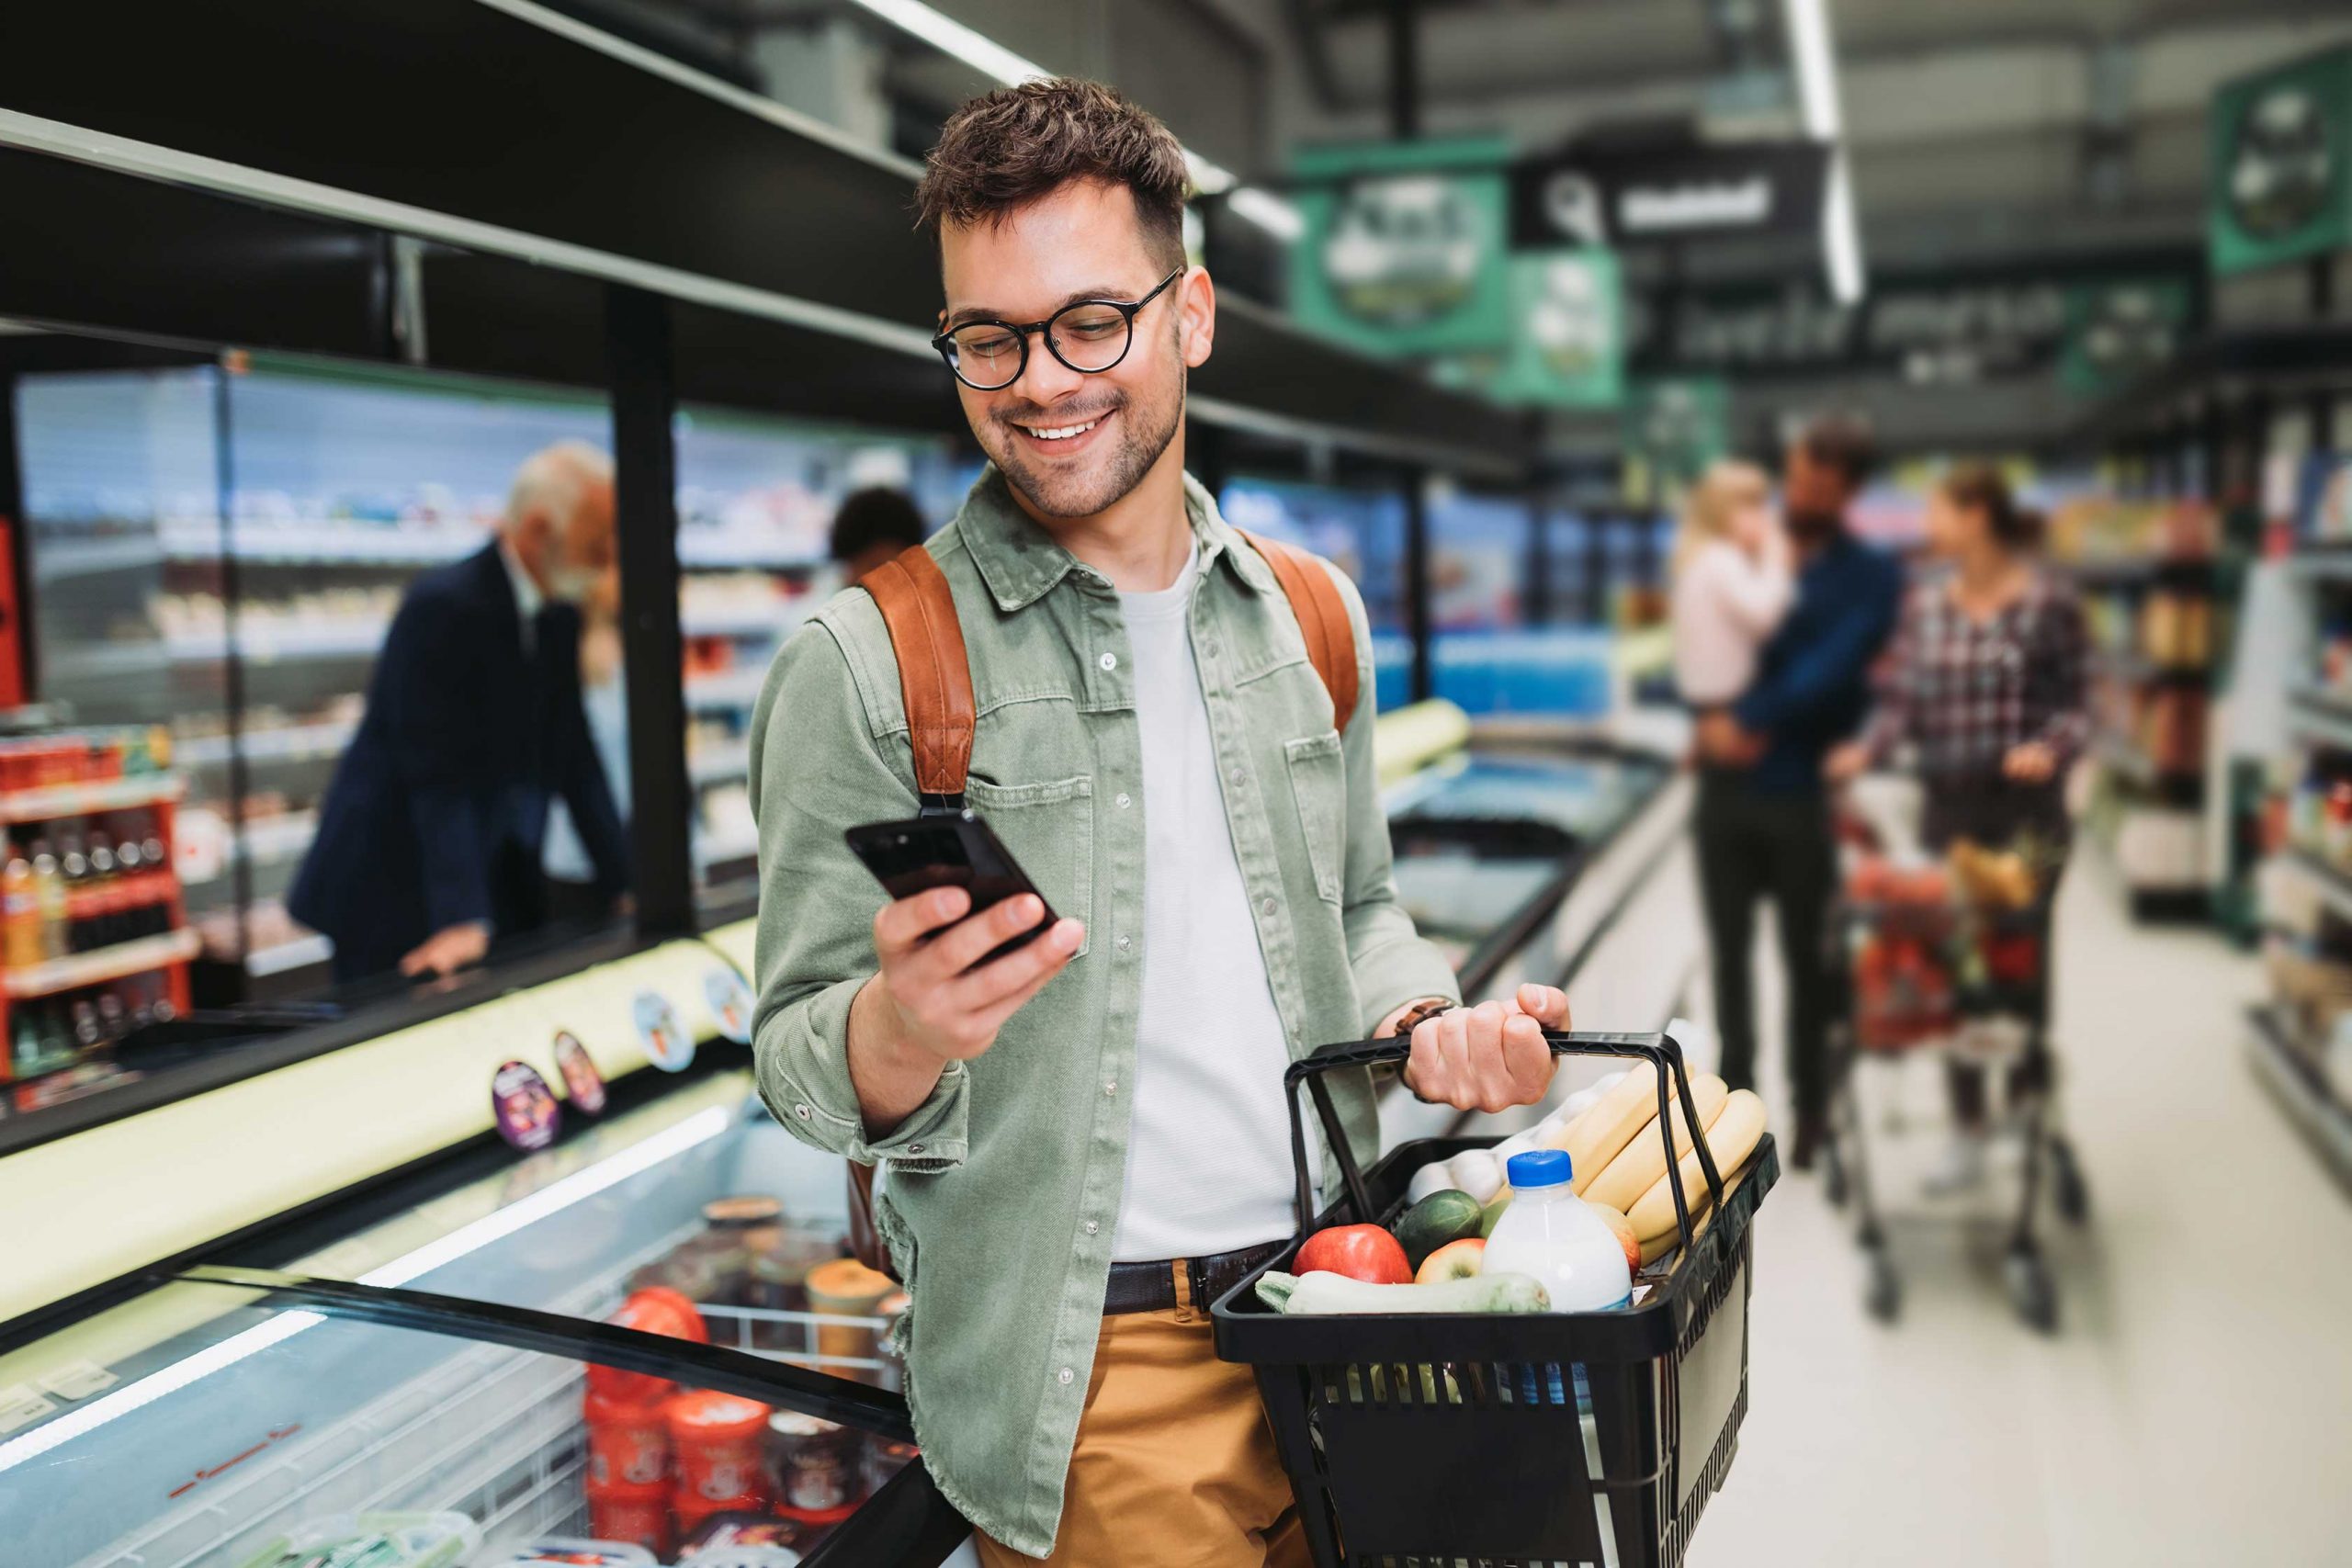 Man checks his phone while shopping at the grocery store.